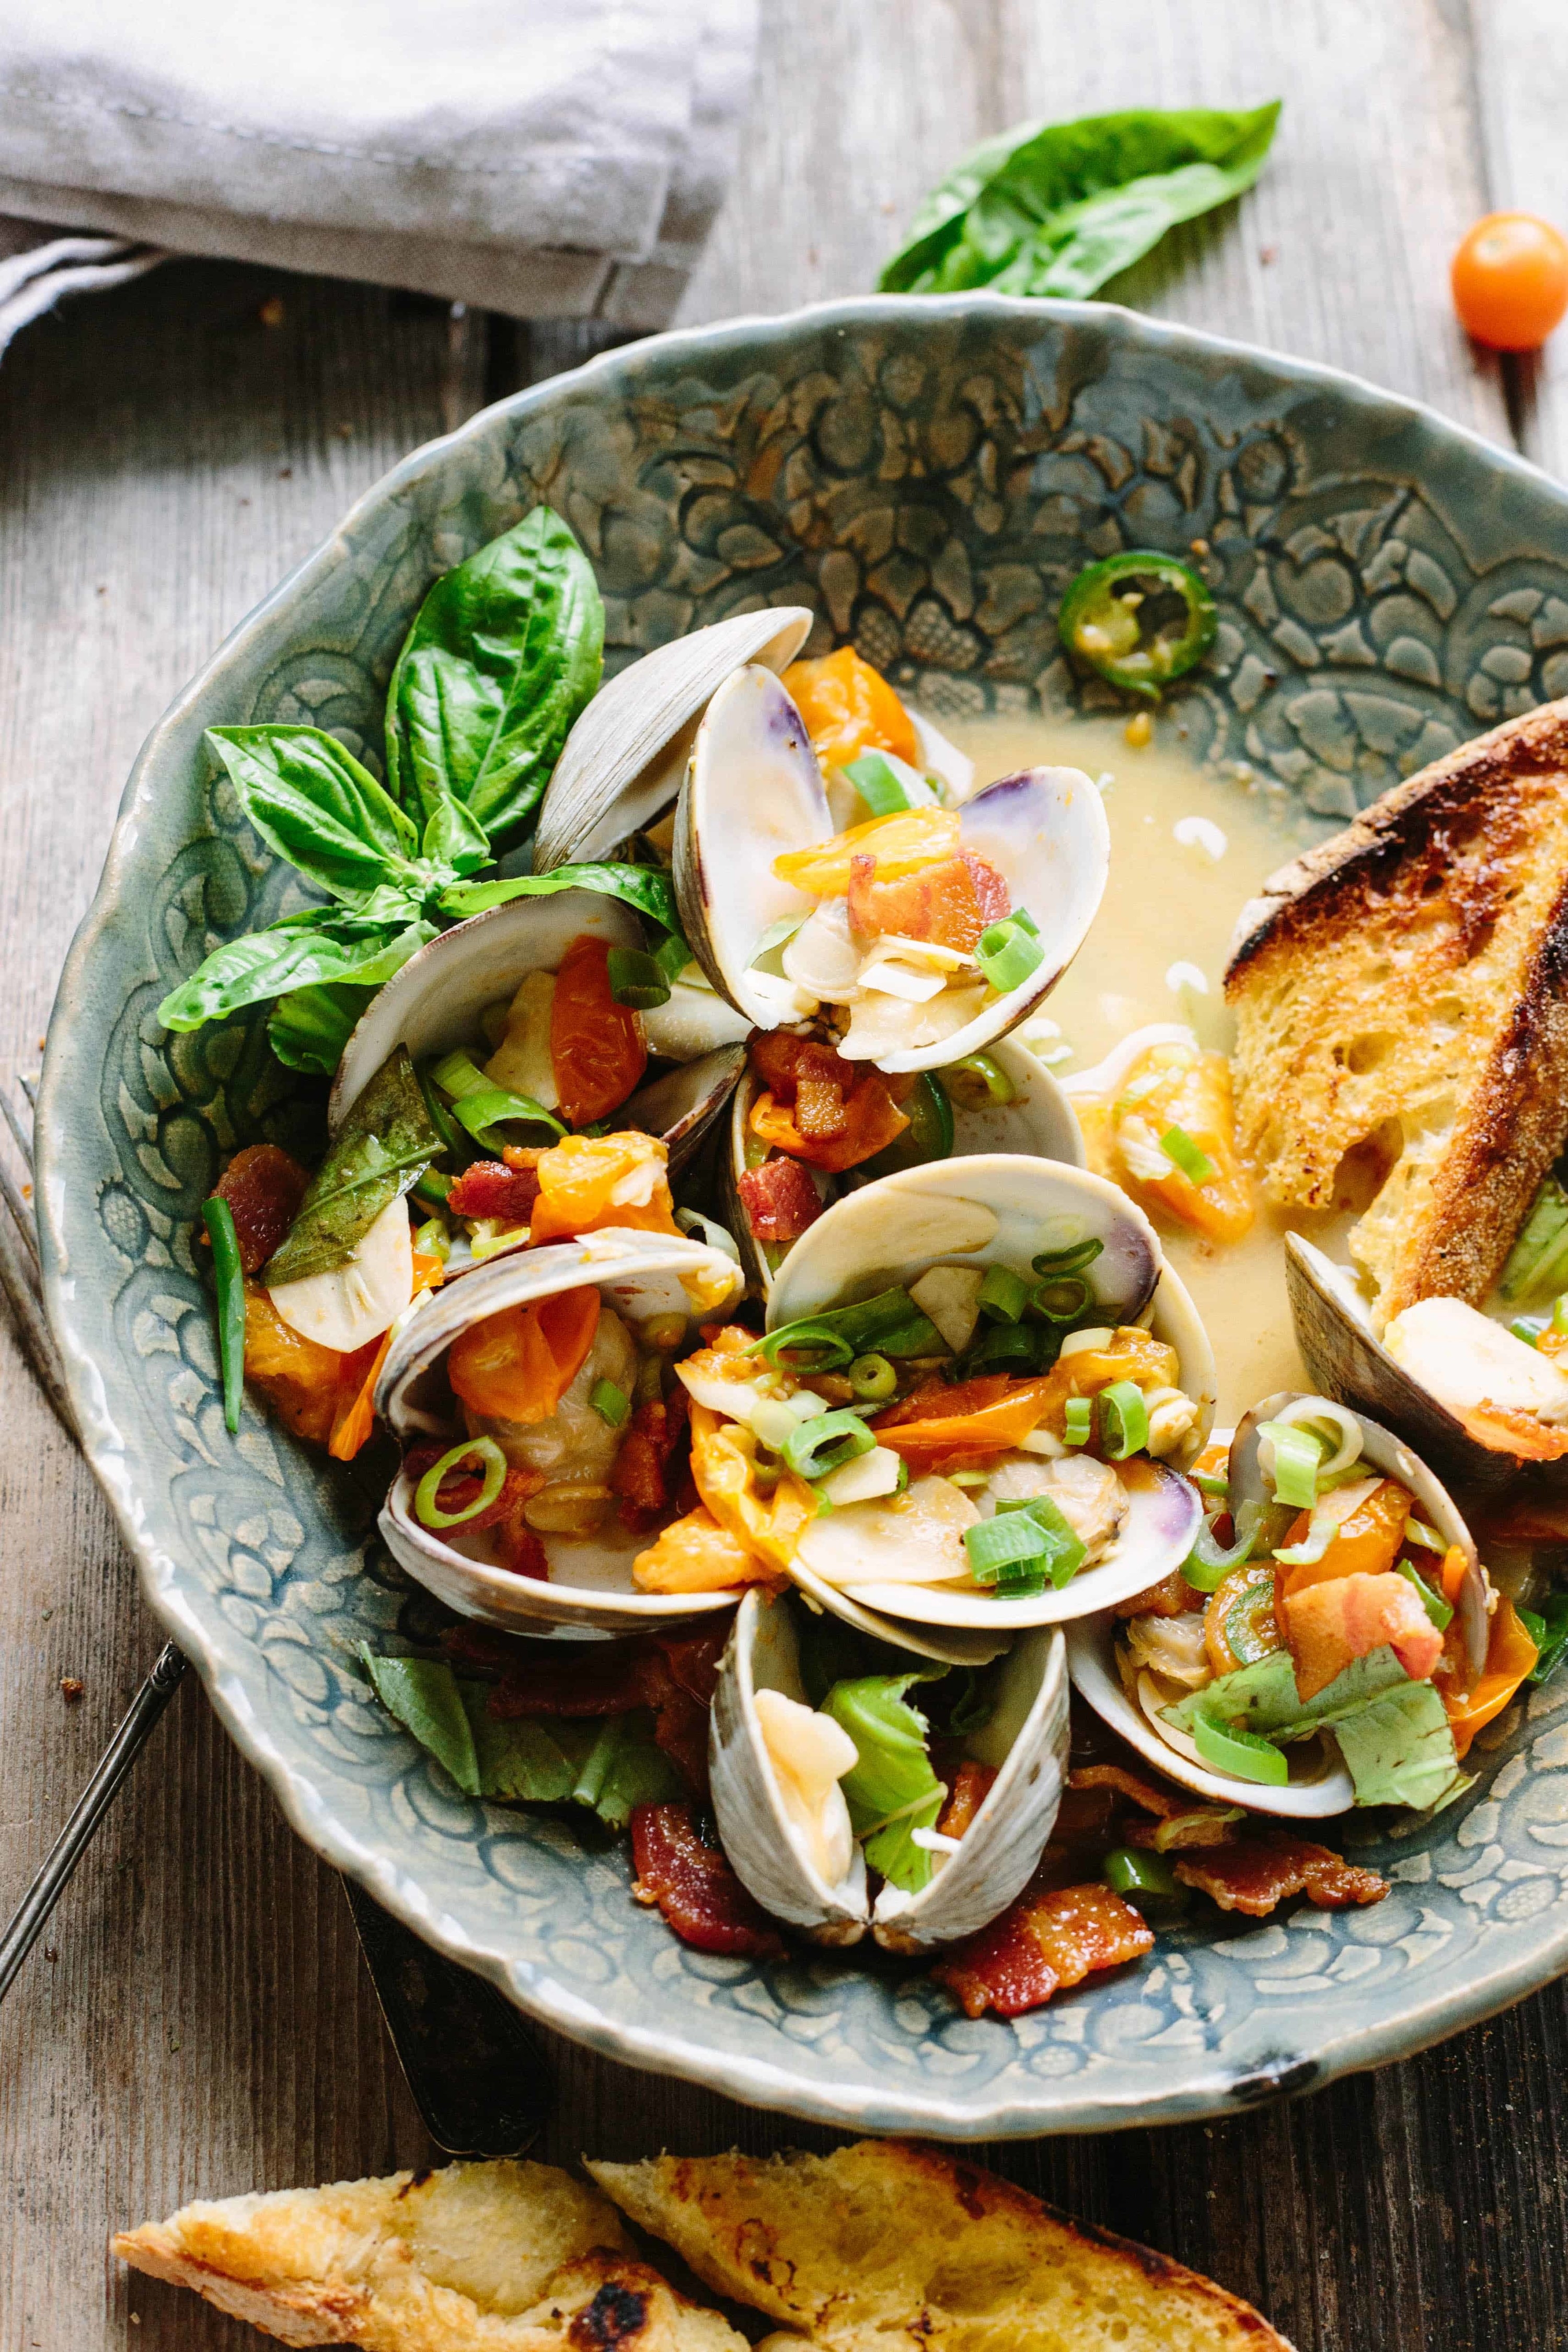 Brothy clams with bread.